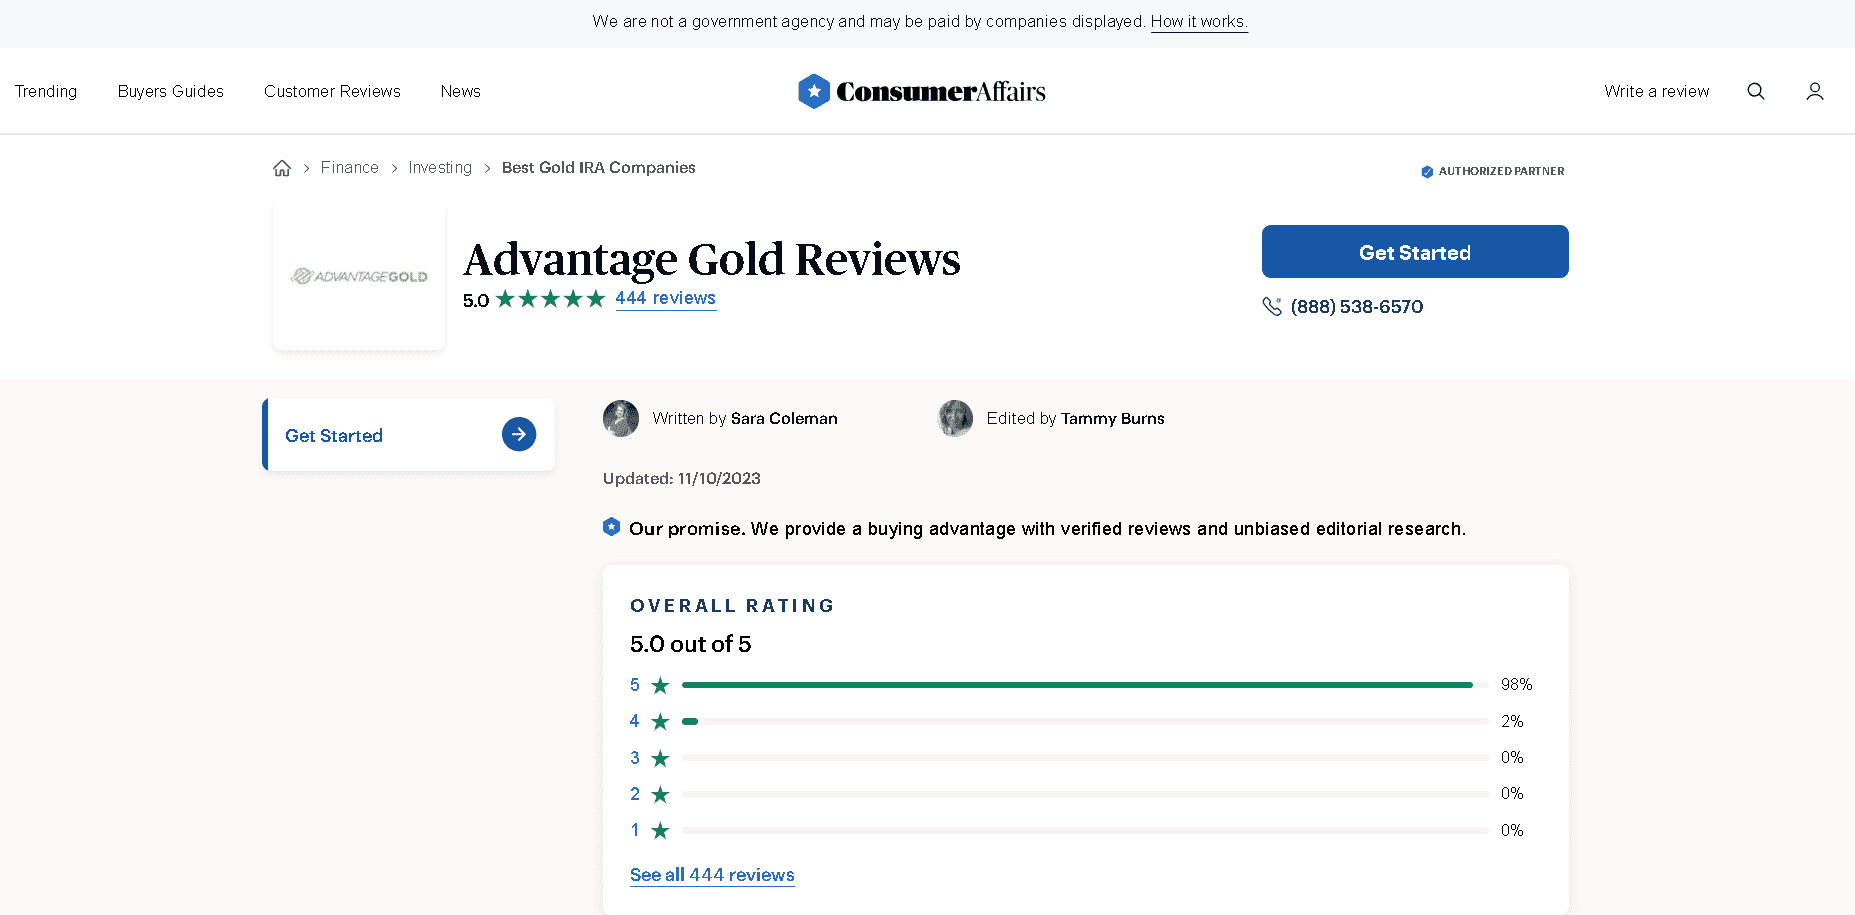 Advantage Gold profile and positive reviews on ConsumerAffairs